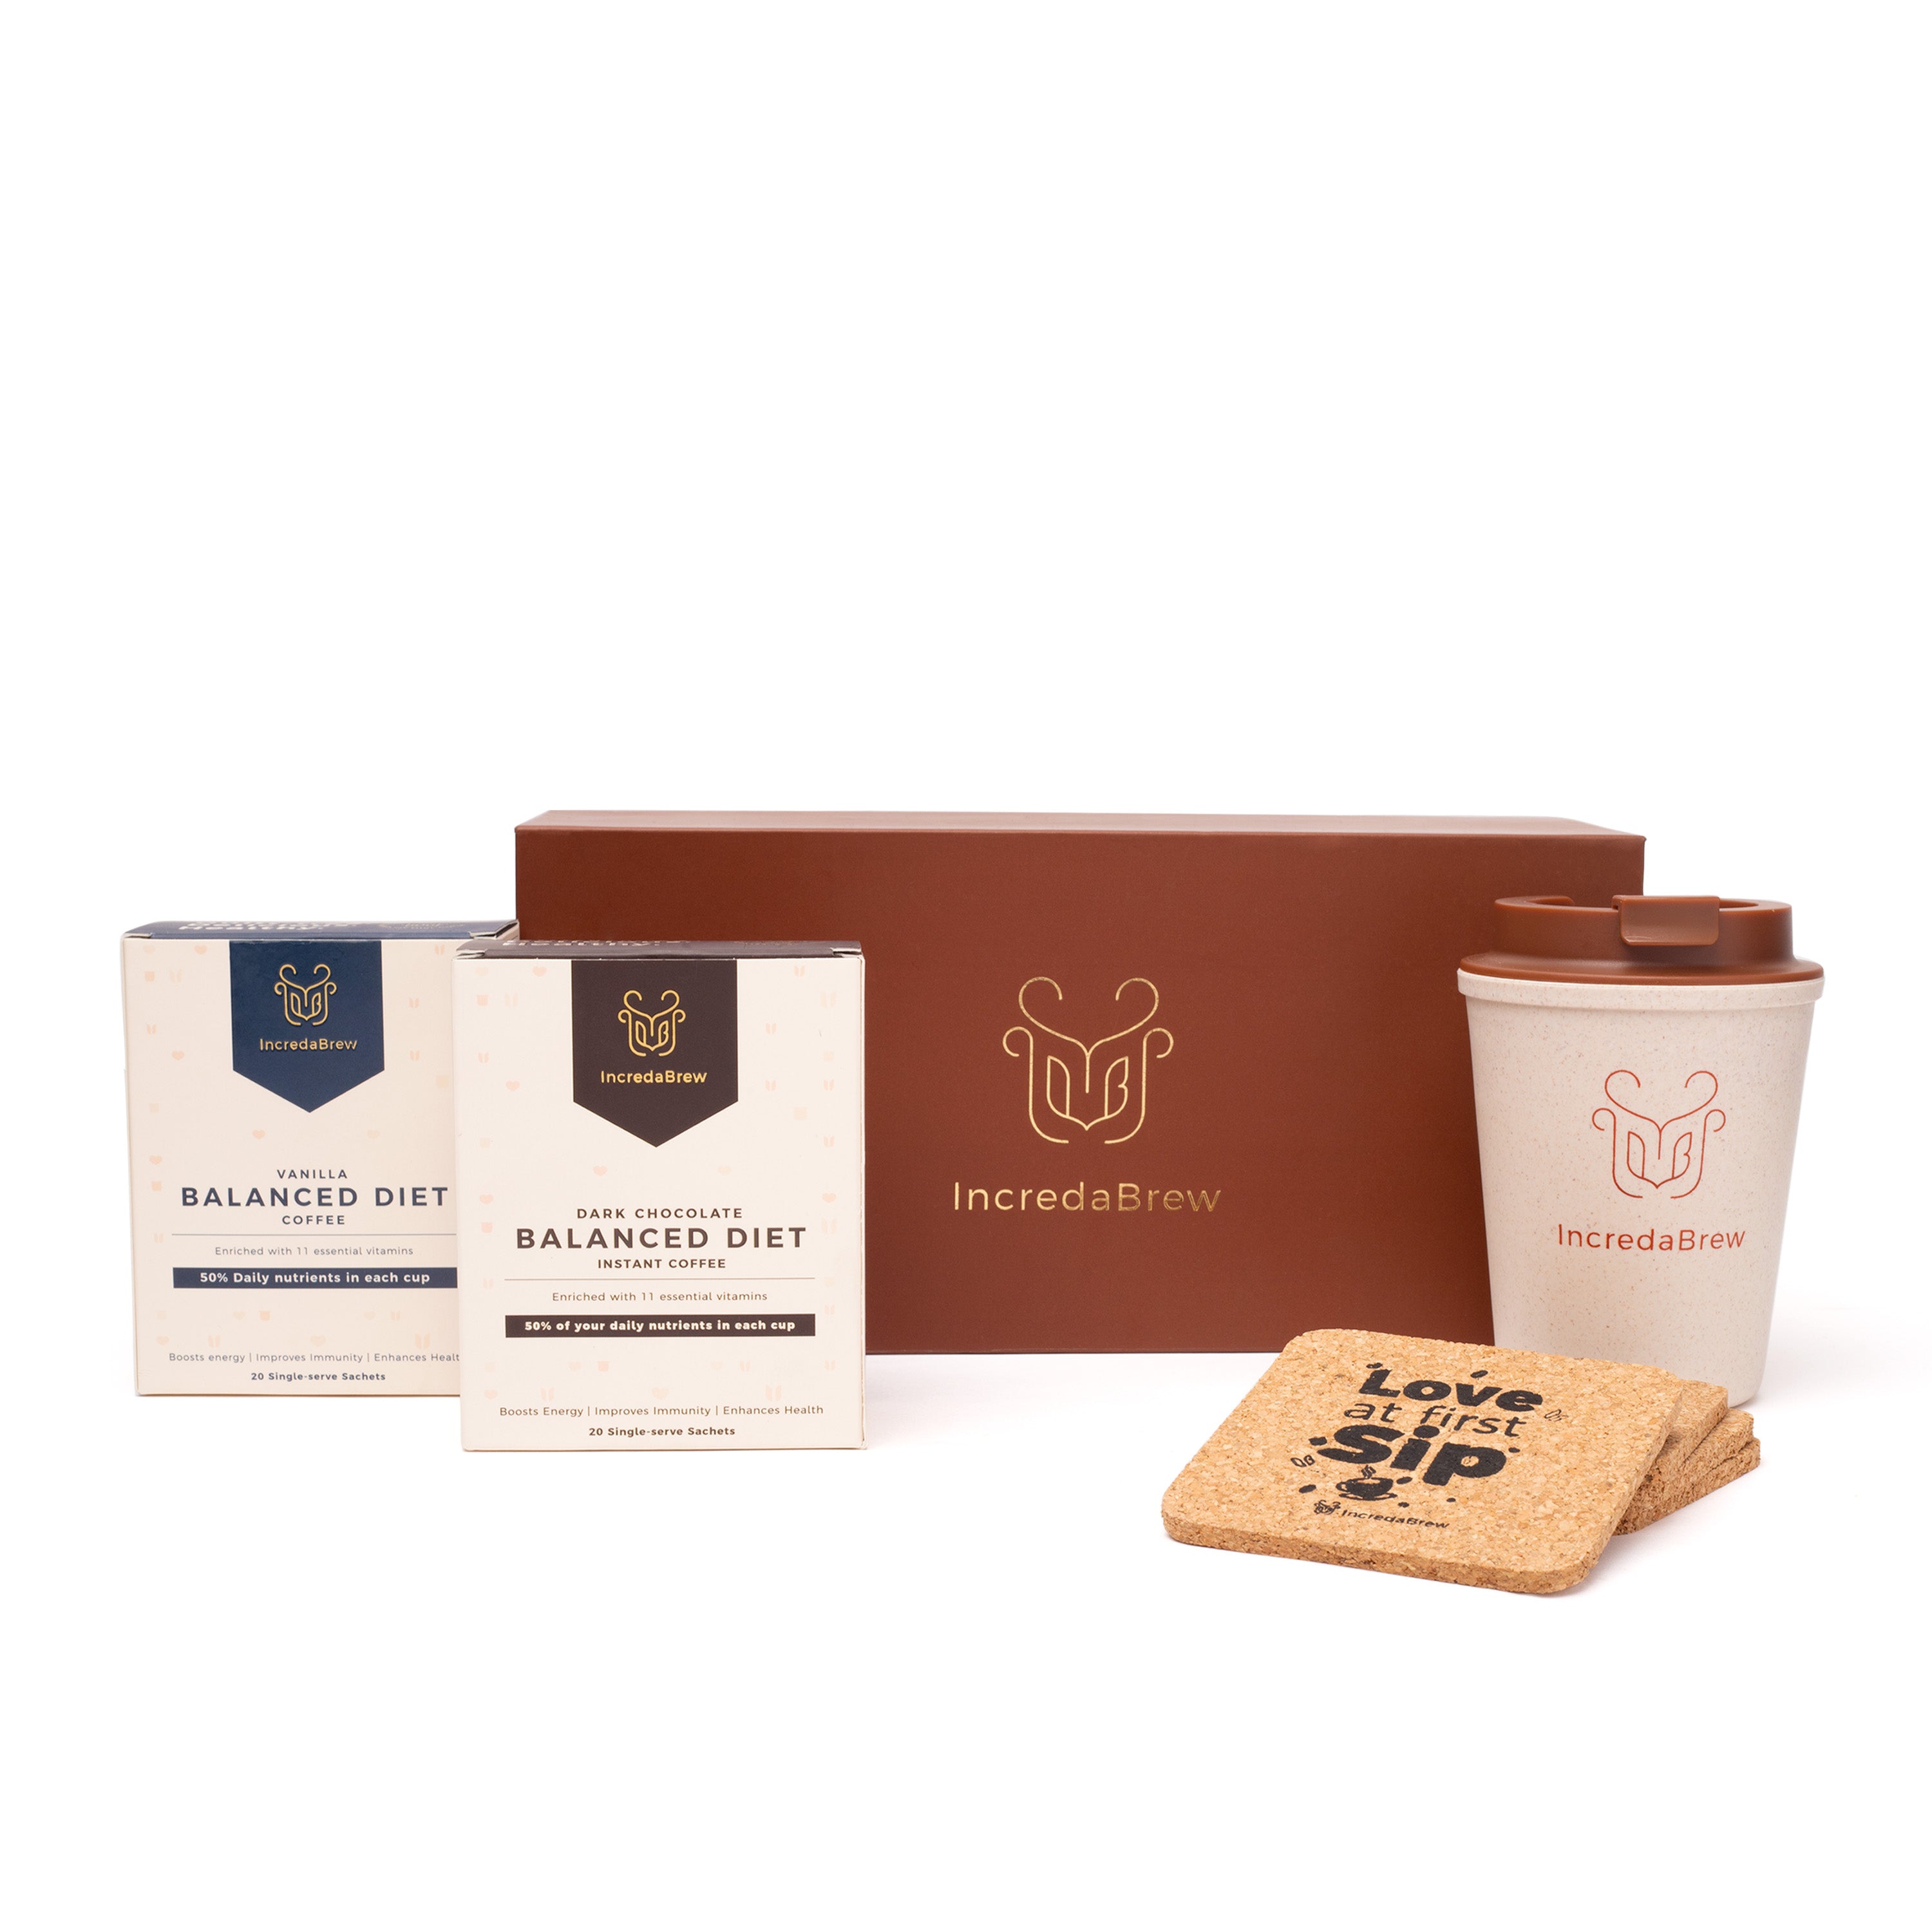 Incredabrew Any 2 Coffee Boxes, 1 Sipper & 4 Coasters Giftset